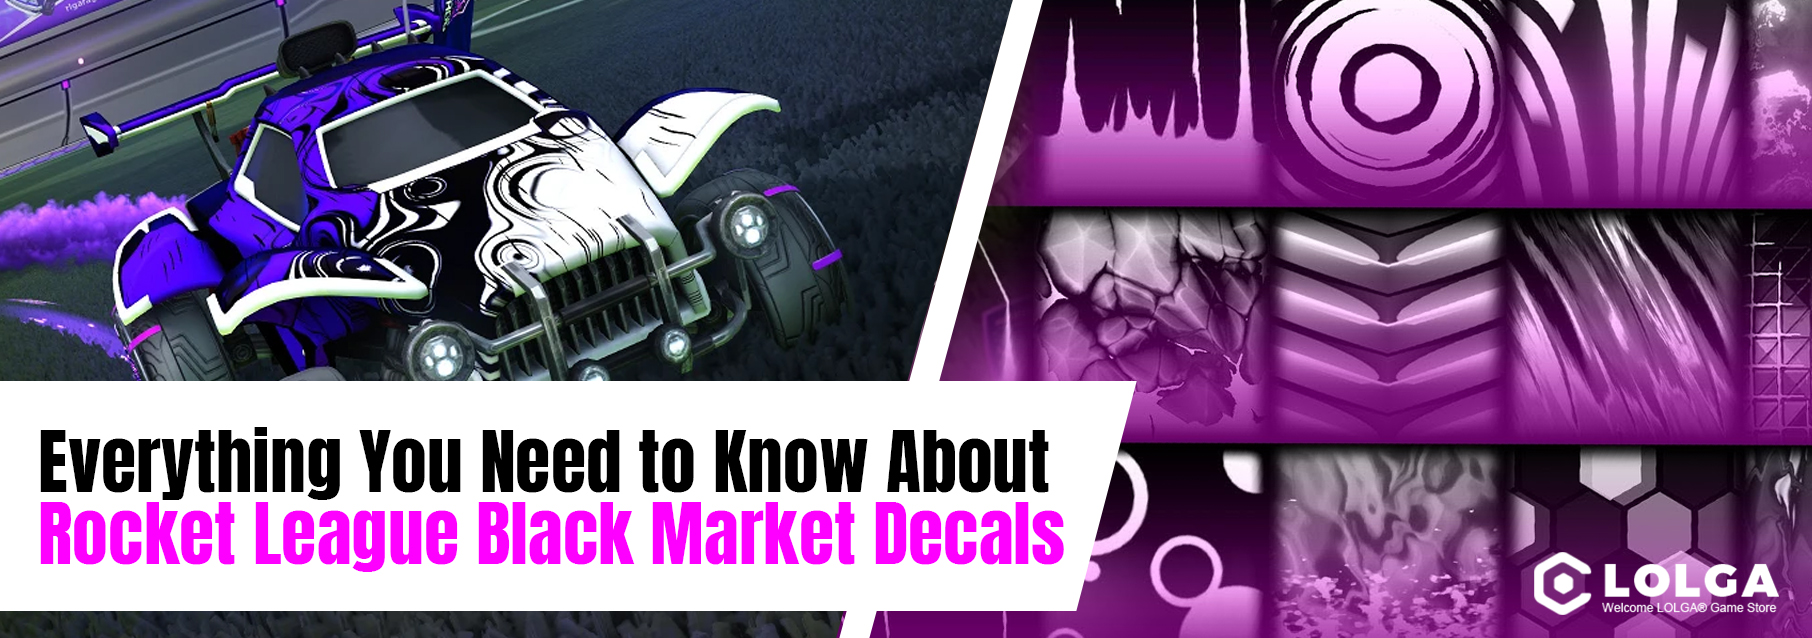  Everything You Need to Know About Rocket League Black Market Decals 